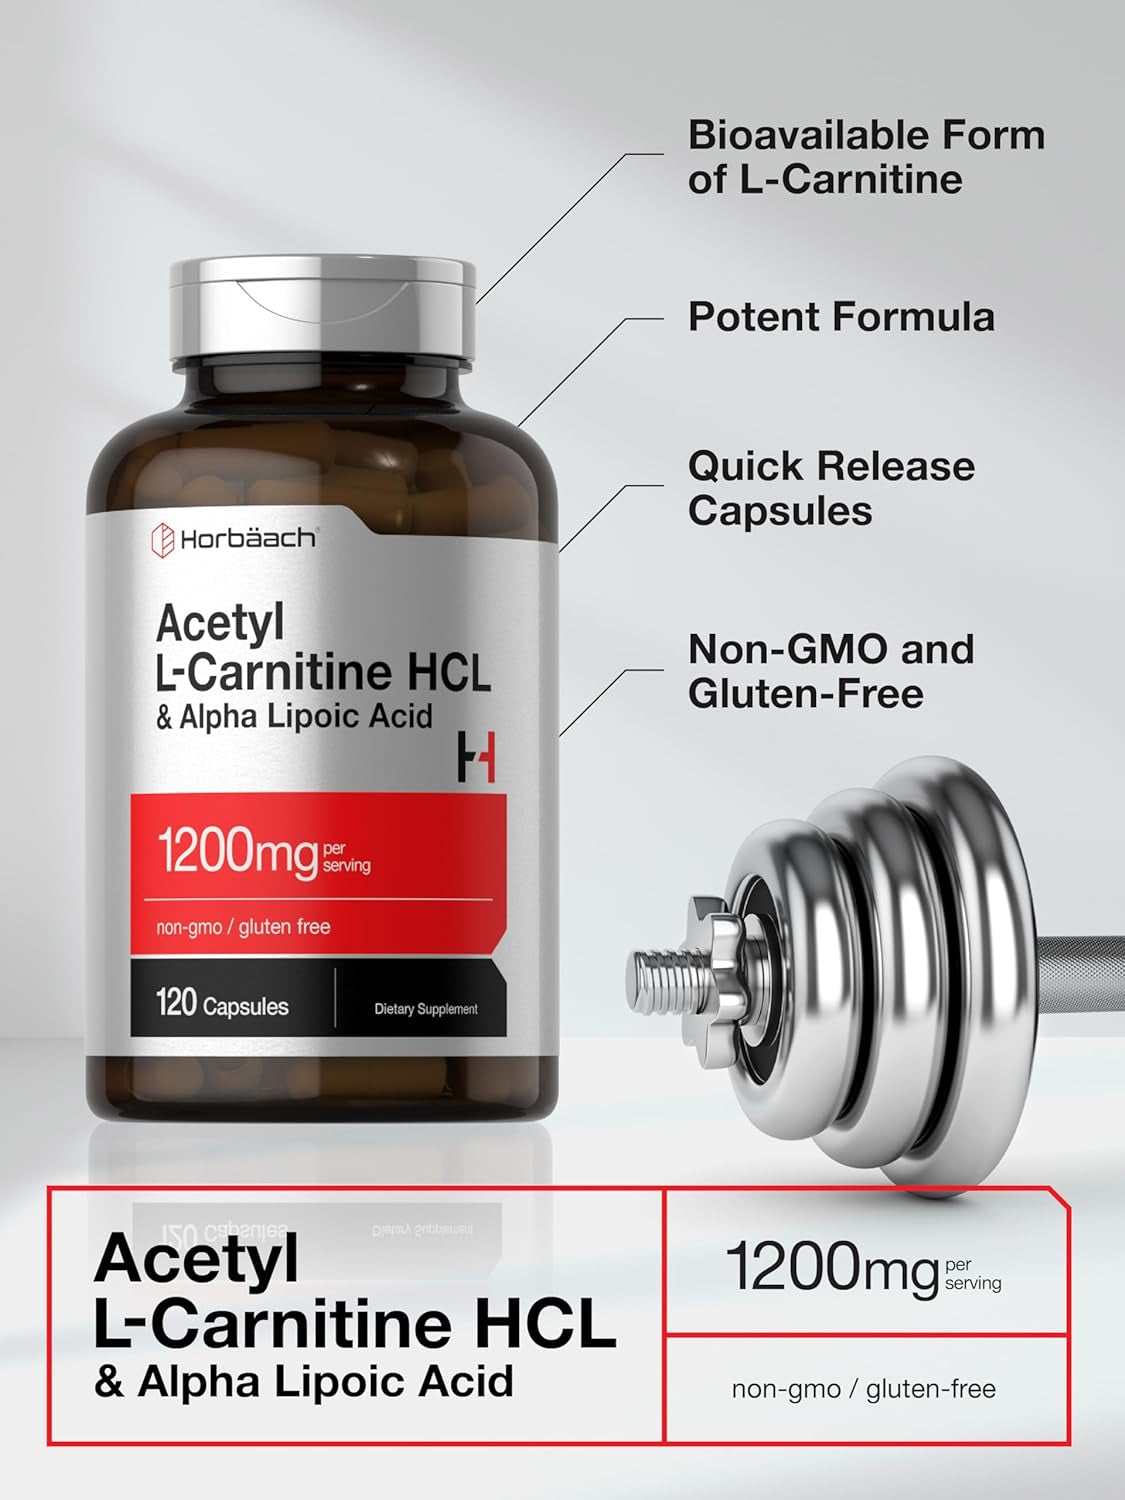 Acetyl L Carnitine HCL & Alpha Lipoic Acid 1200Mg | 120 Capsules | ALC ALA Complex | Non-Gmo & Gluten Free Supplement | by Horbaach